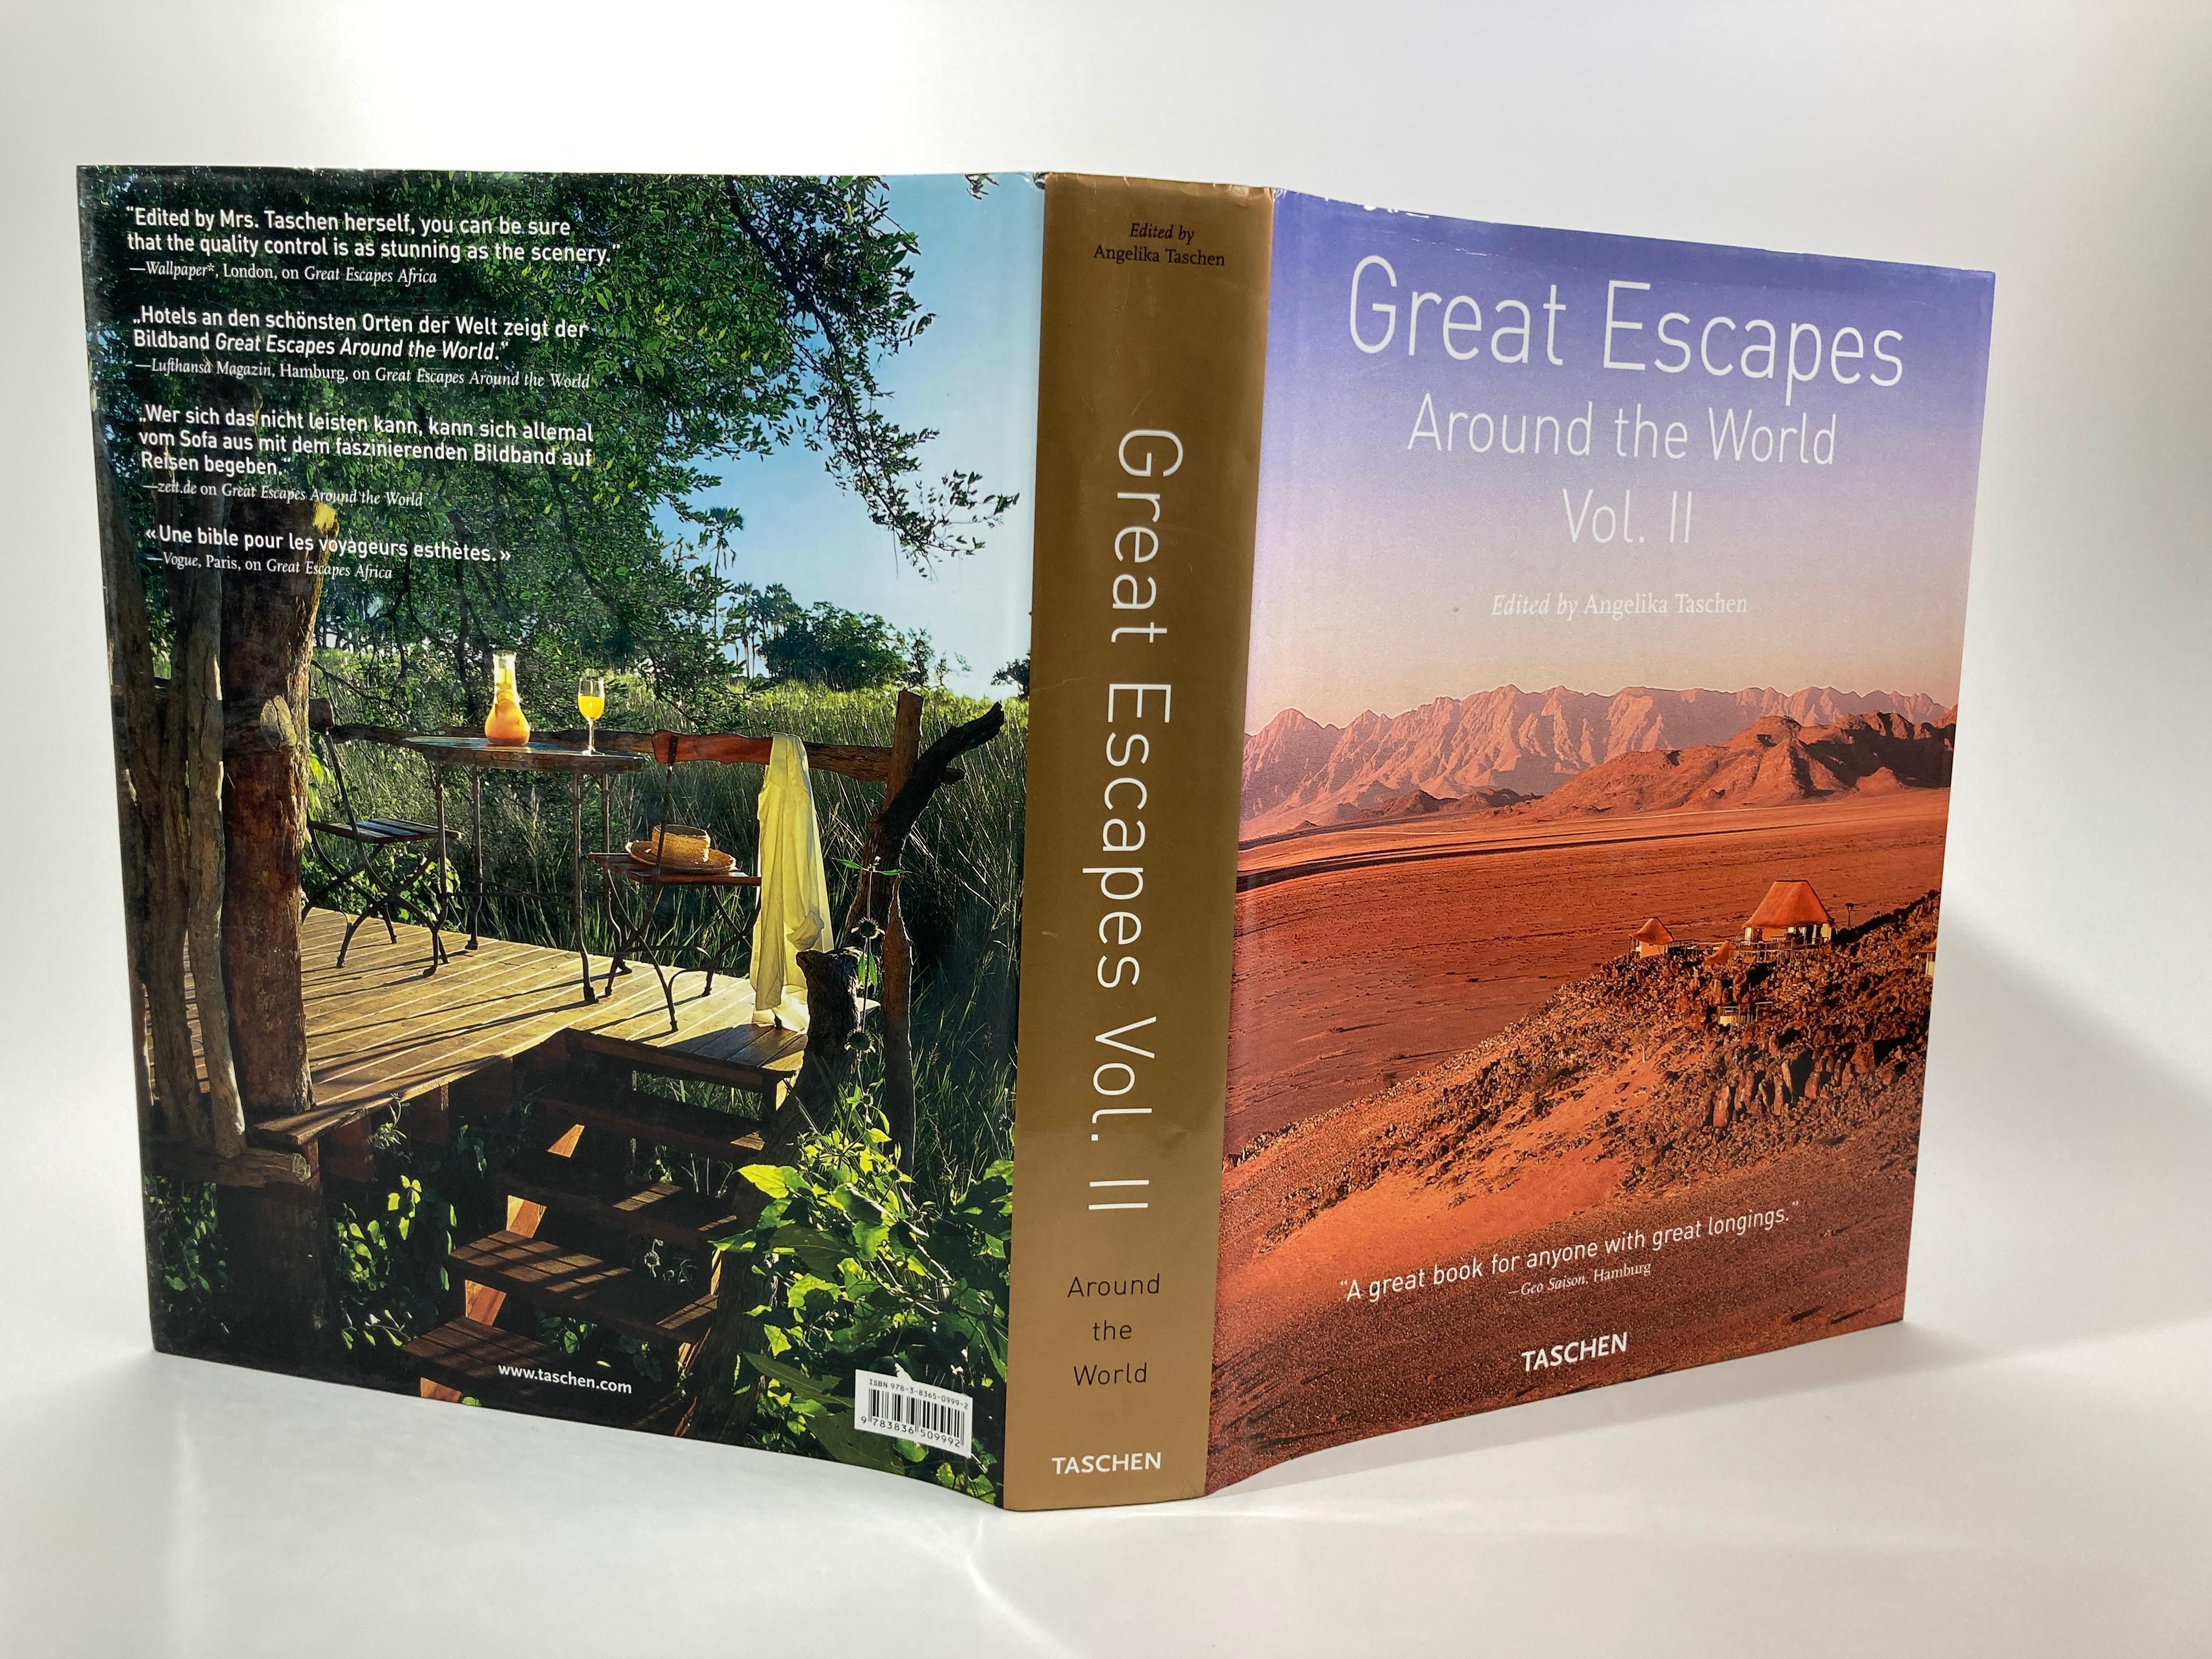 American Great Escapes Around the World Vol. 2 by Taschen Hardcover Large Book